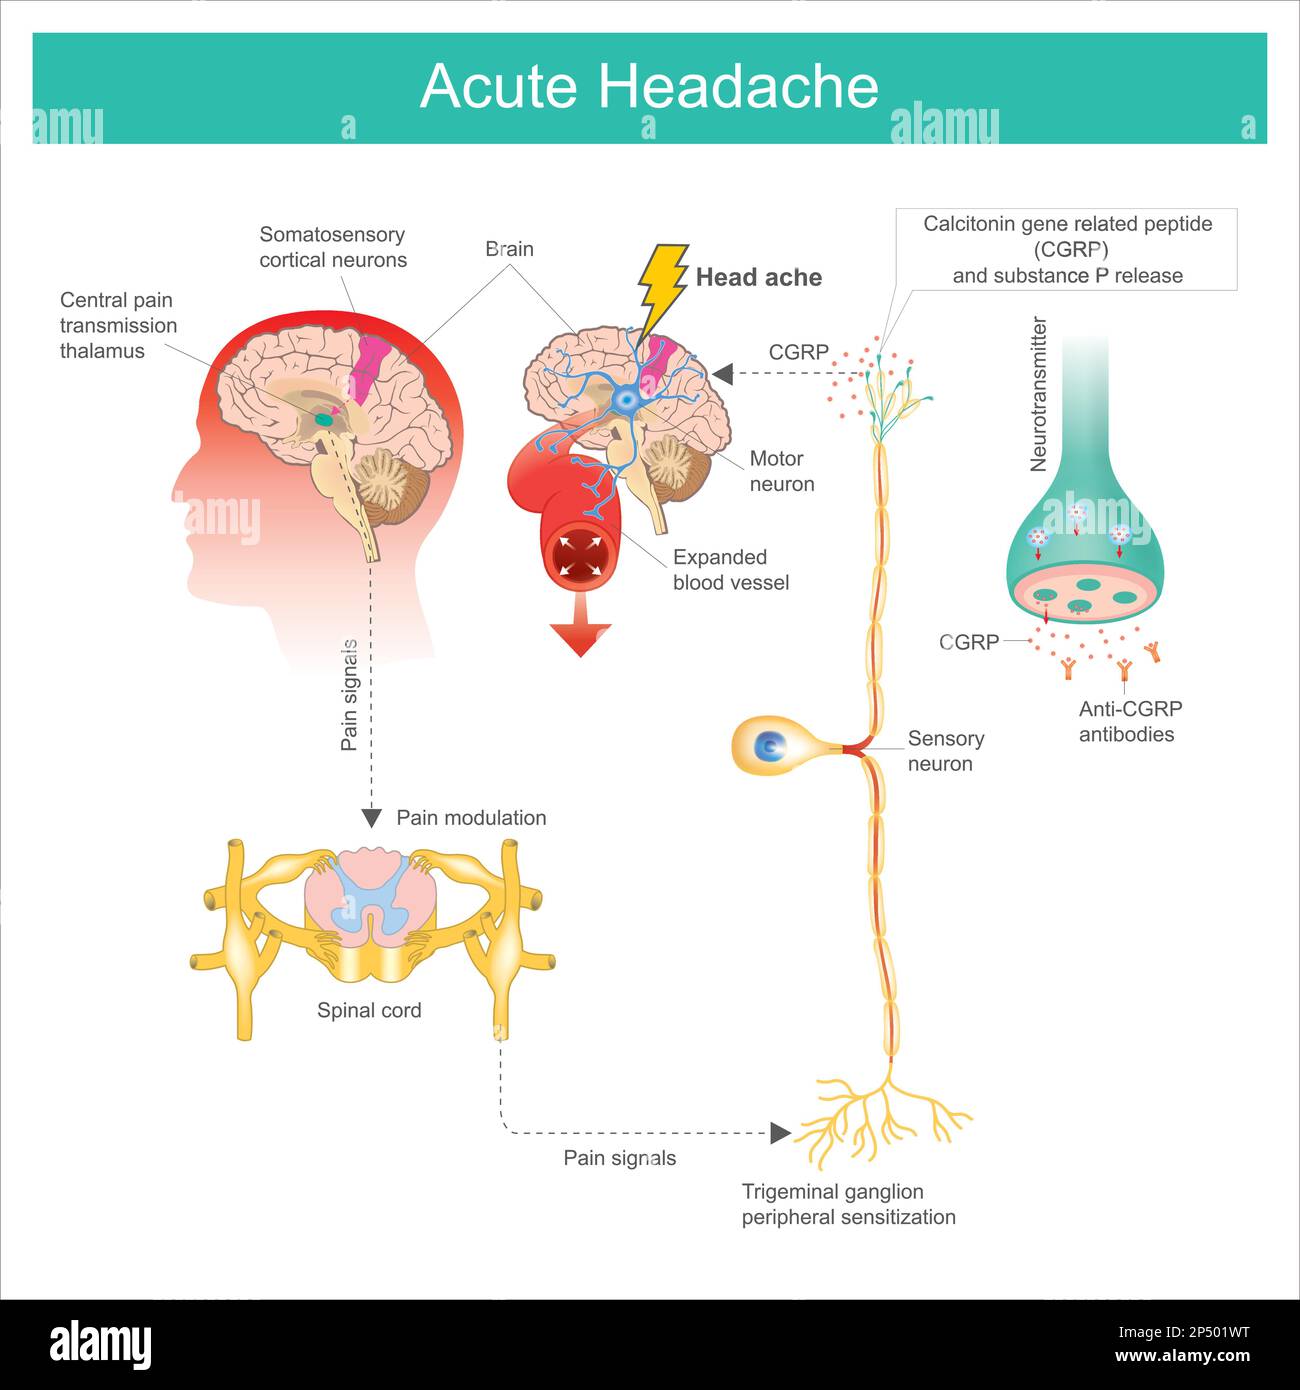 Acute Headache. Diagram learning The Acute Headache as a result a process of the brain and consequences expanded the blood vessel. Stock Vector